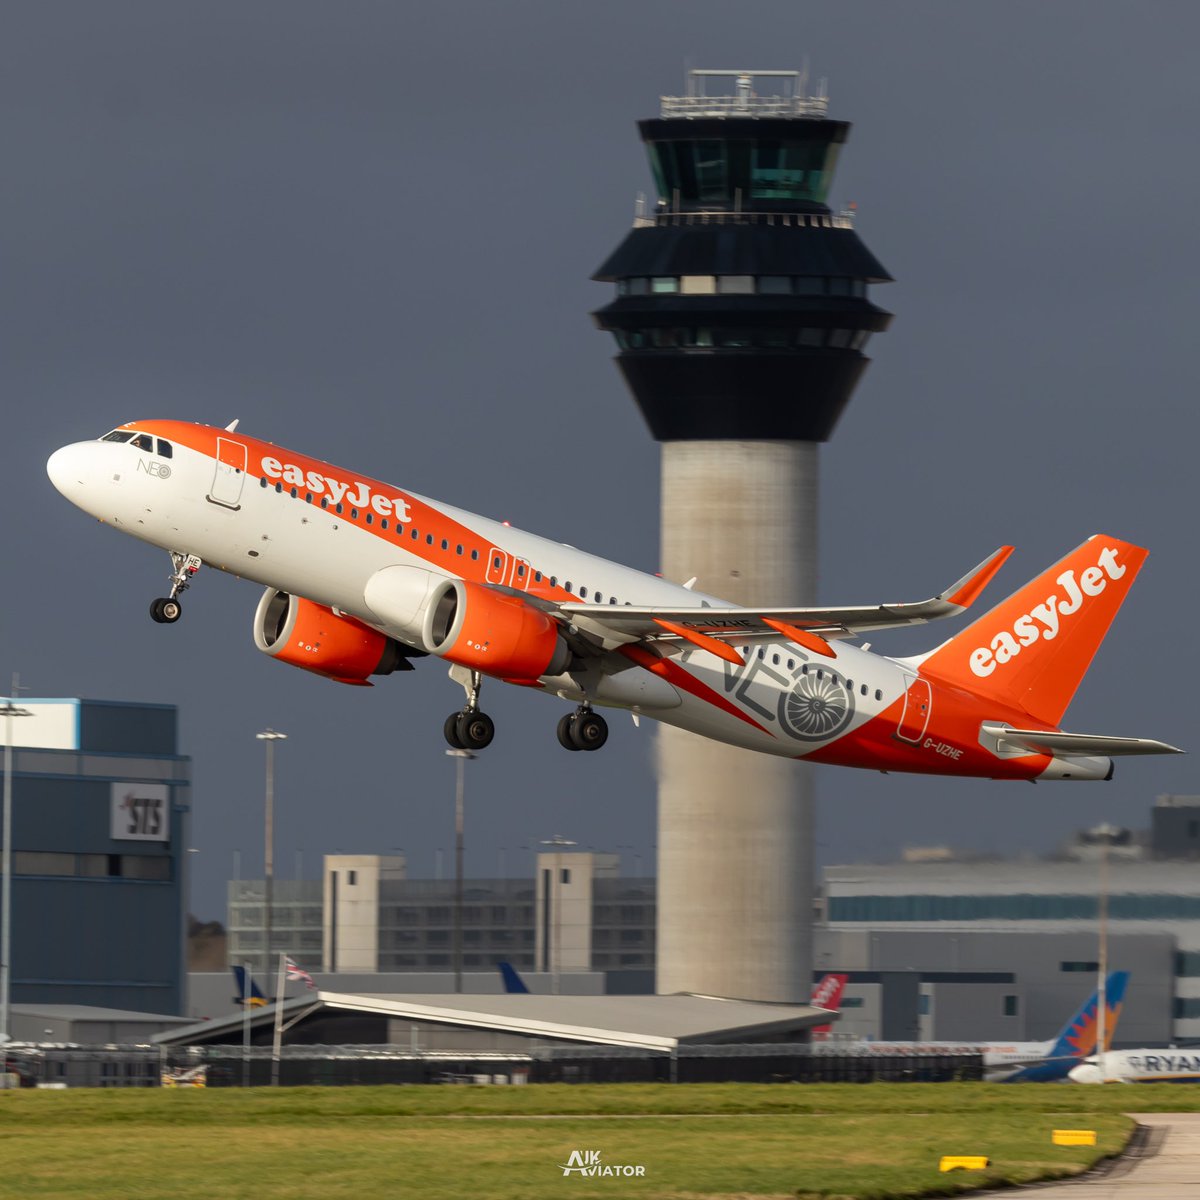 Today’s Post Features EasyJet A320Neo Rocketing Pass NATS Tower Heading To Belfast International 🇬🇧🇮🇪
•
#easyjet #A320Neo #Airbus320neo #Airbusa320neo #proaviation #aviationeverywhere 
•
𝗔𝗹𝗹 𝗣𝗵𝗼𝘁𝗼𝘀 𝗢𝘄𝗲𝗻 | 𝗨𝗞 𝗔𝘃𝗶𝗮𝘁𝗼𝗿 ©️